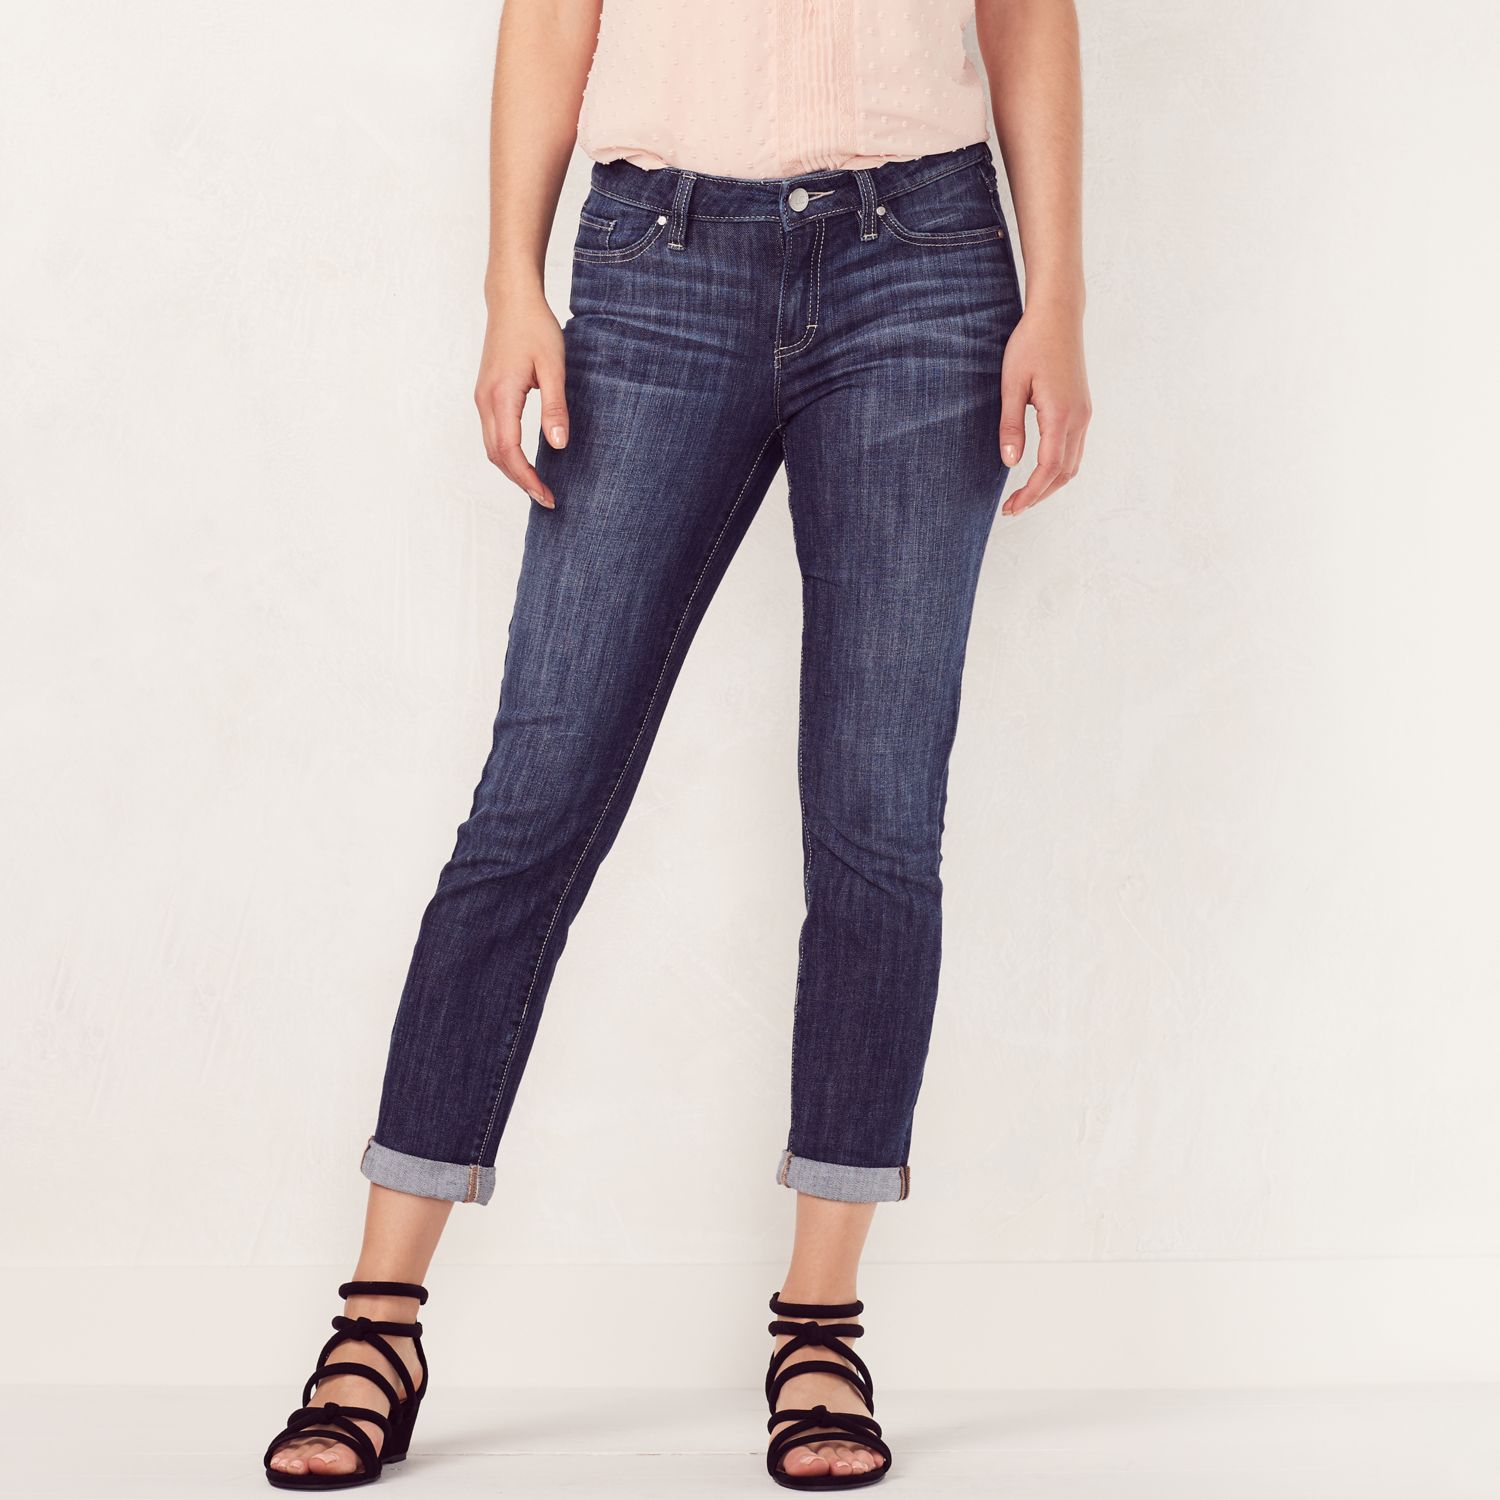 lauren conrad cuffed skinny ankle jeans